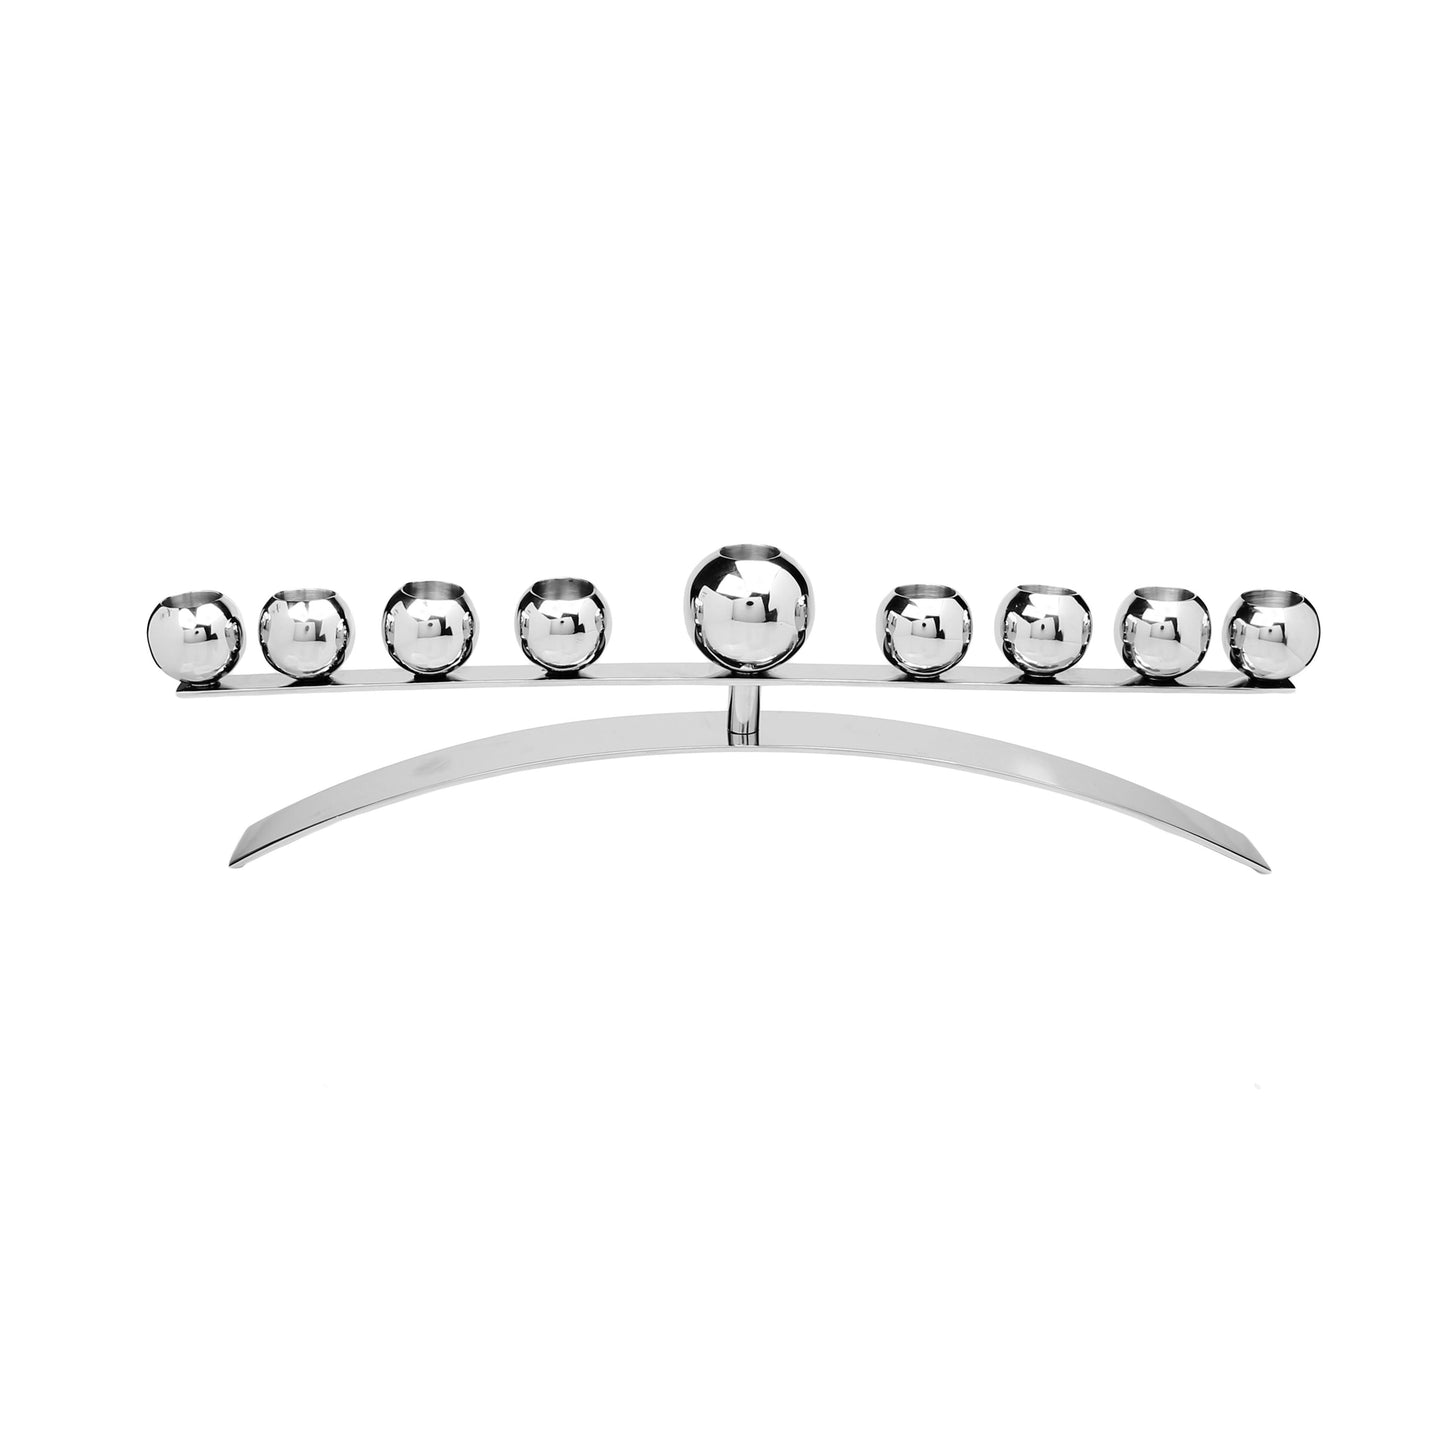 Classic Touch Decor 17" Stainless Steel Modern Menorah, Silver